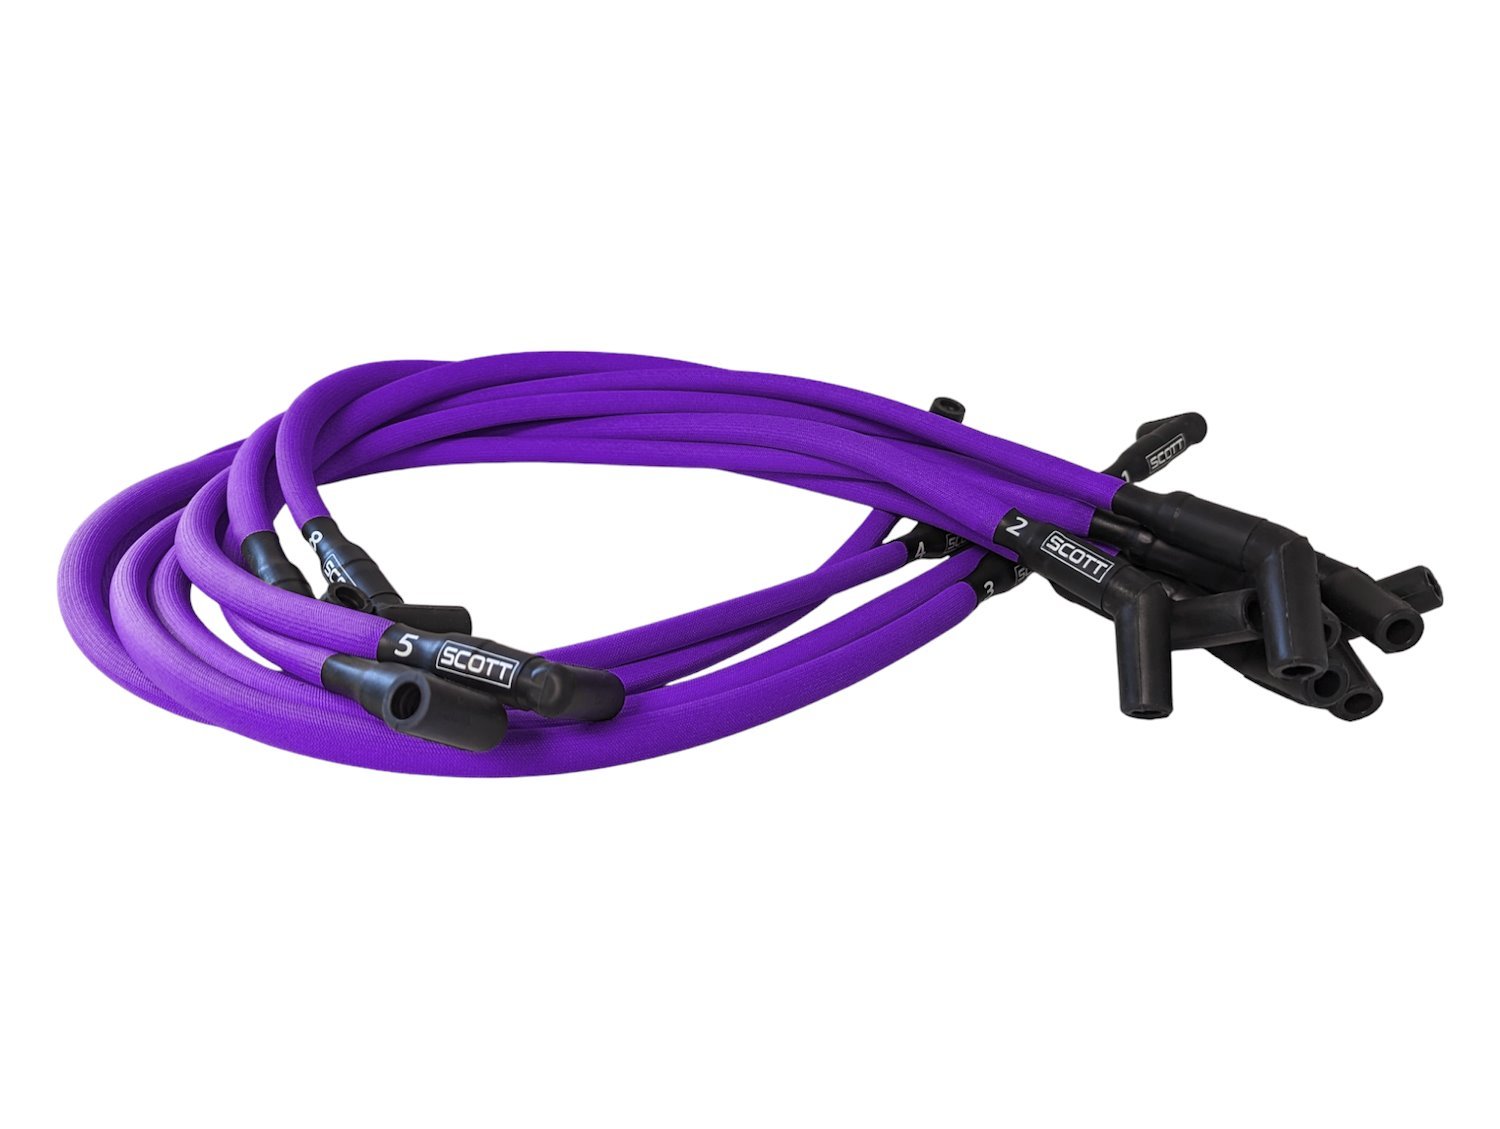 SPW-PS-426-7 High-Performance Fiberglass-Oversleeved Spark Plug Wire Set for Small Block Ford, Over Valve Cover [Purple]